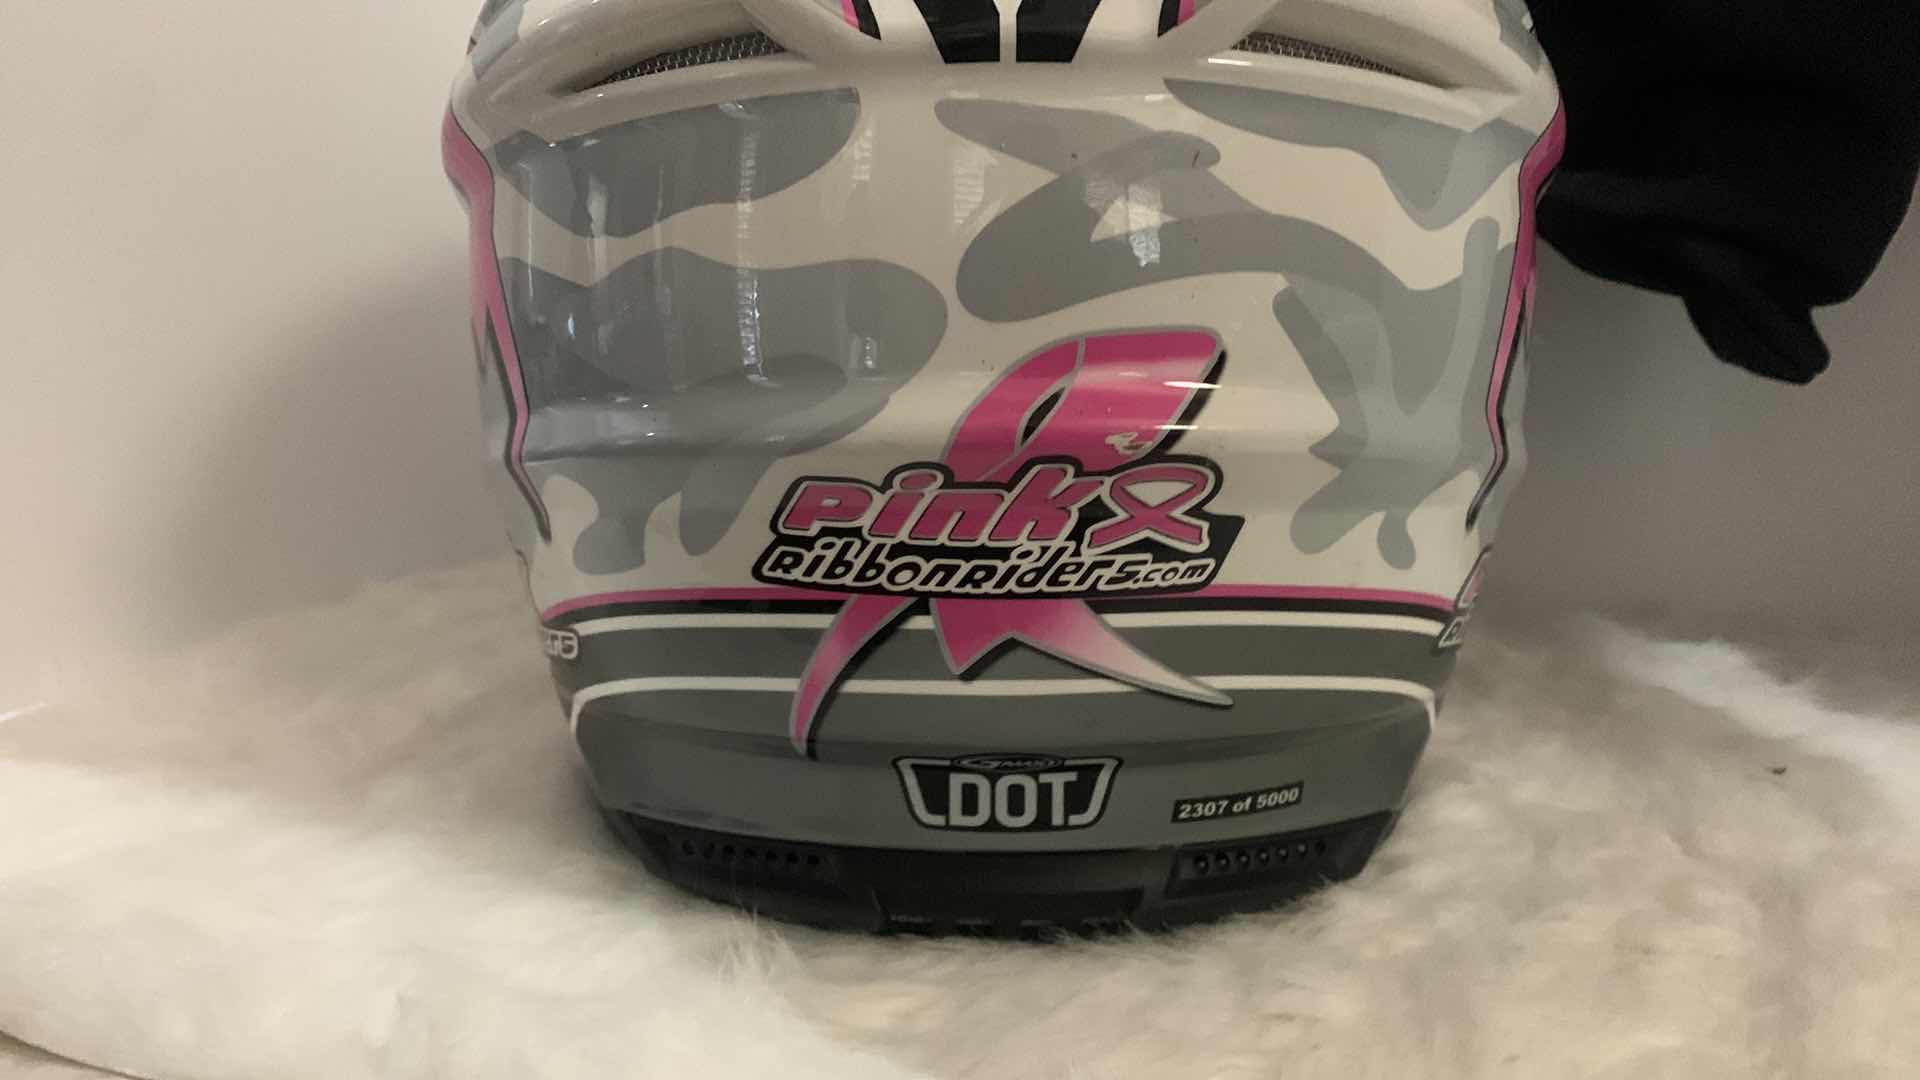 Photo 6 of WOMENS LIMITED EDITION MOTORCYCLE HELMET PINK RIBBONRIDERS SIZE M